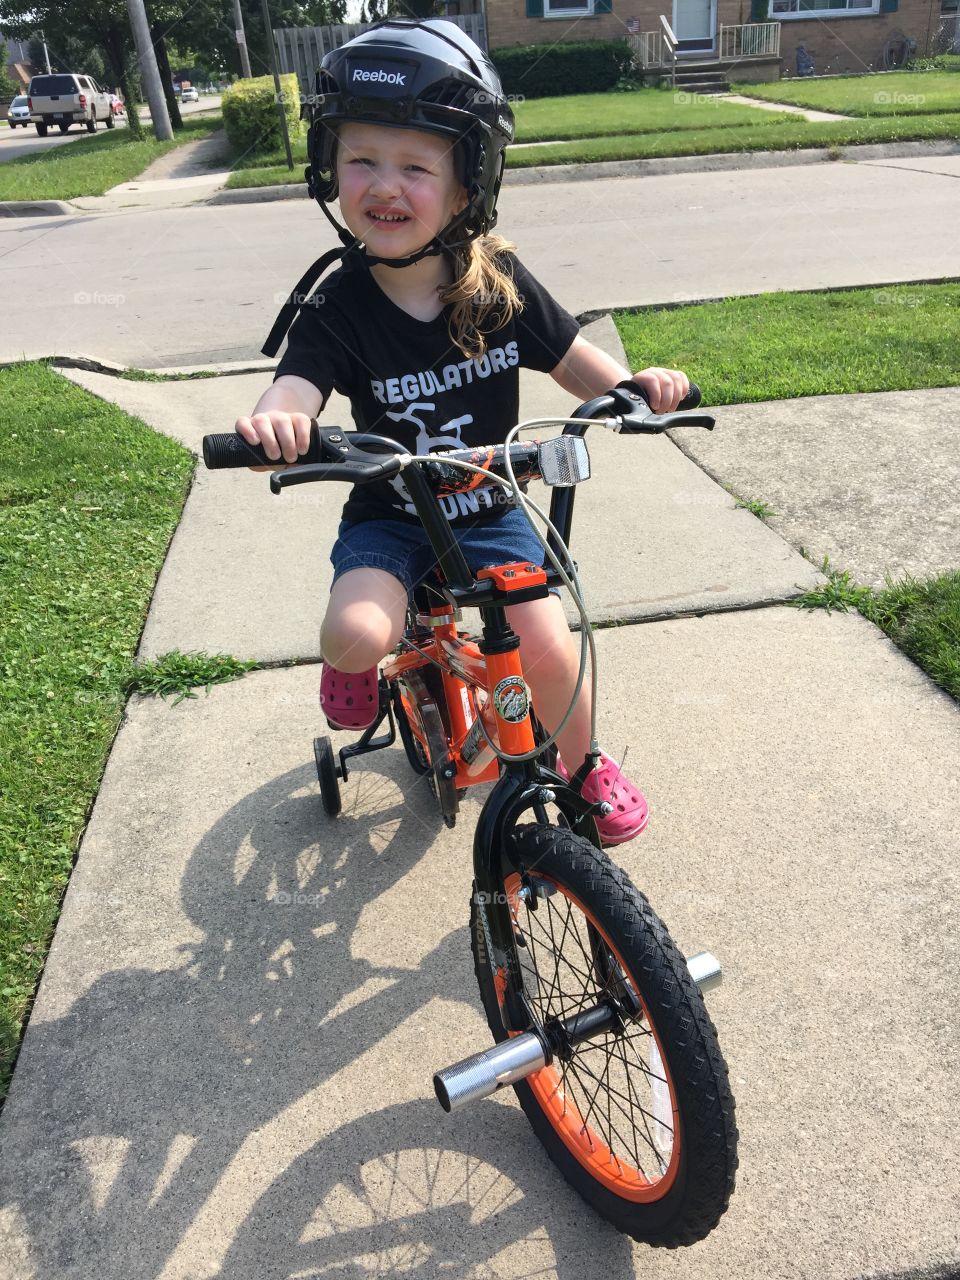 Regulators - Mount Up. My 2 year old out for her first ride on her first big girl bike. 